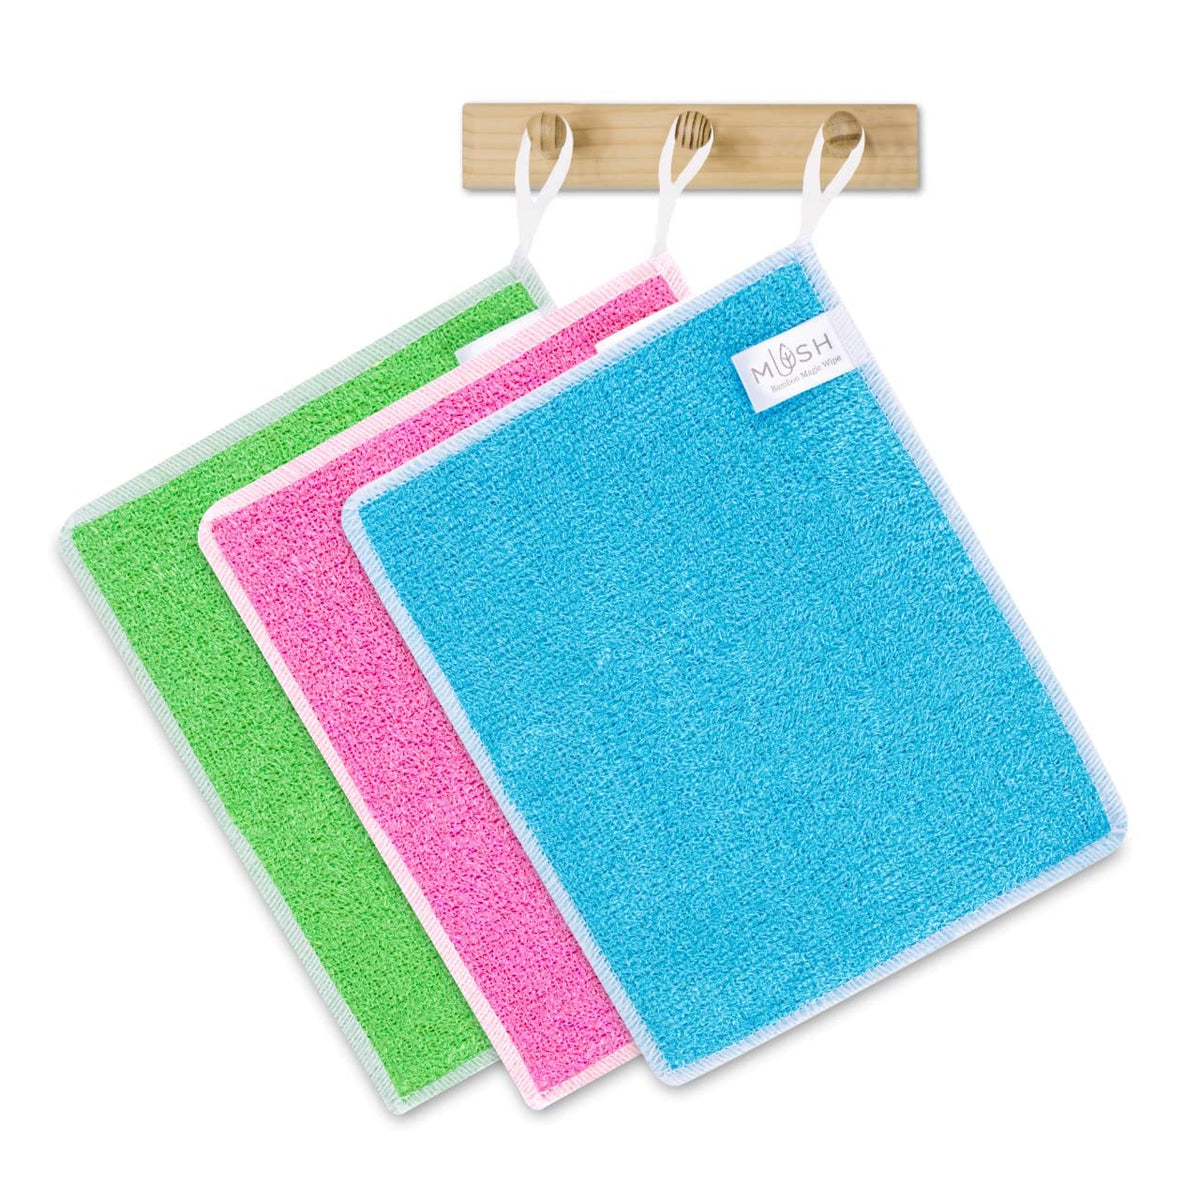 Mush Bamboo Super Absorbent, Anti Odor, Free Reusable Cleaning Cloth - Multipurpose Wash Cloth for Kitchen, Car, Windows, Glass, Furniture (200 GSM, Assorted, Pack of 3)